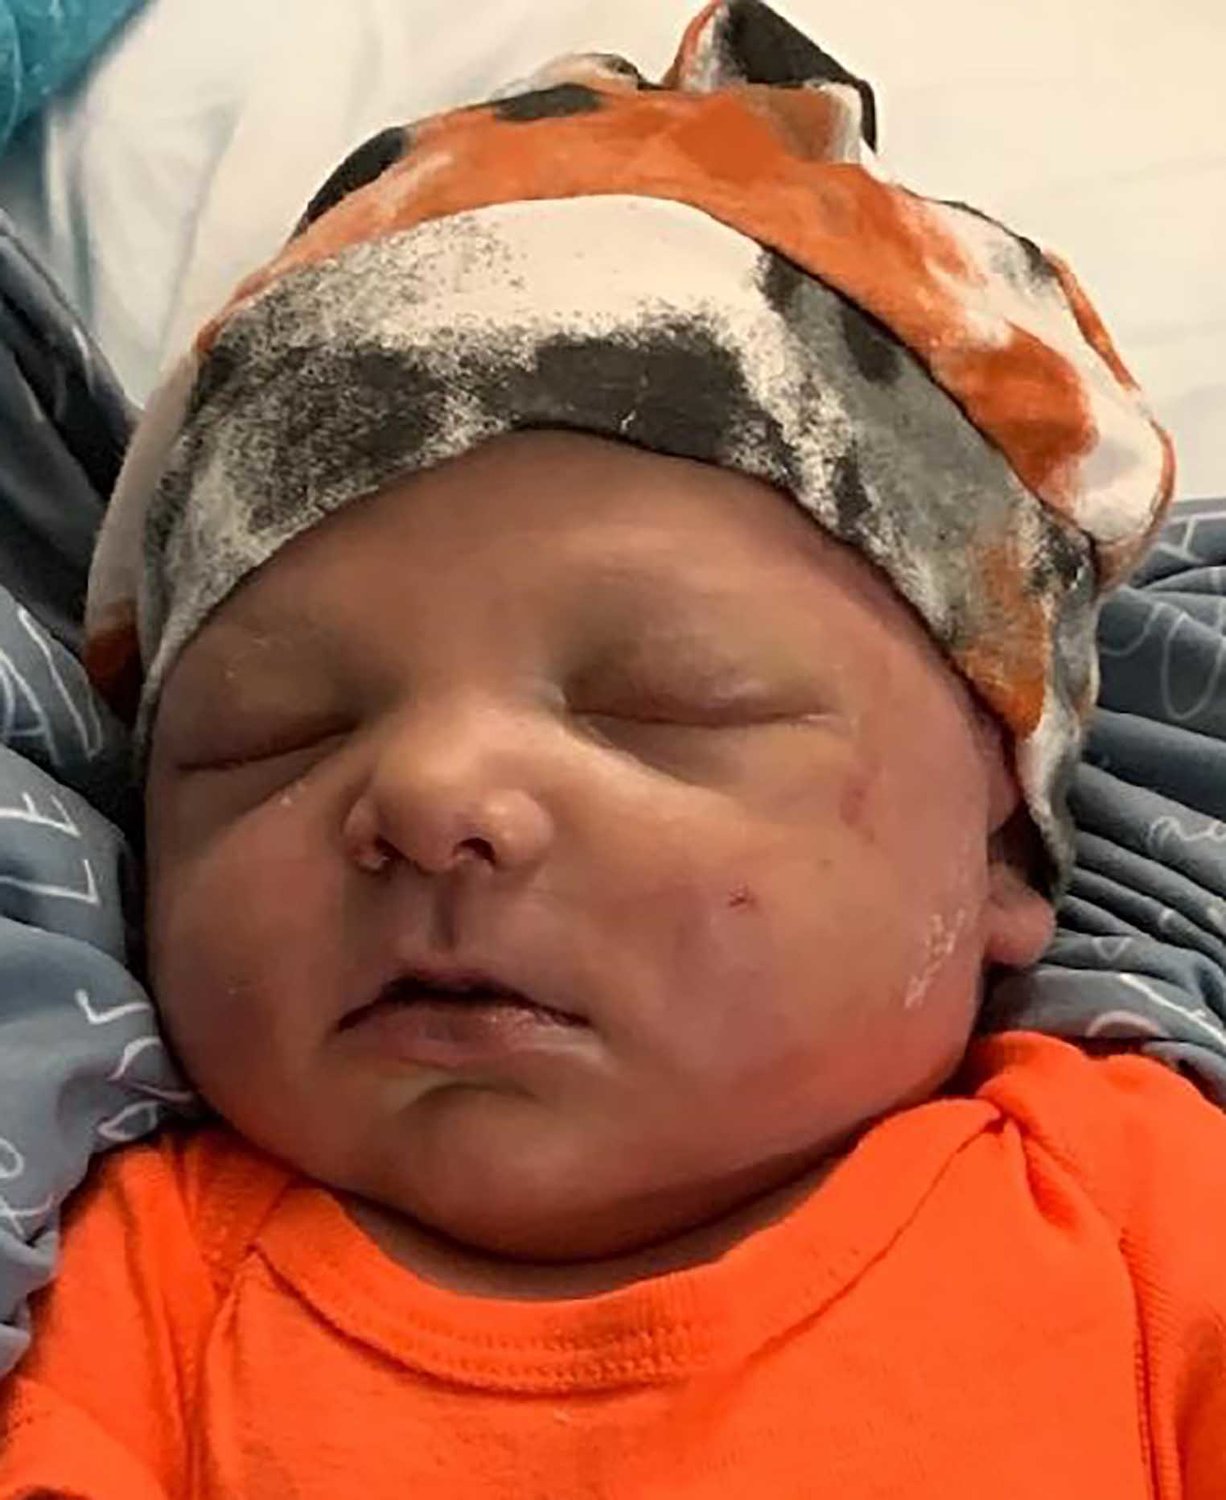 Cade Kyle Wear, 2 days old, of Keokuk died Friday, August 20, 2021.